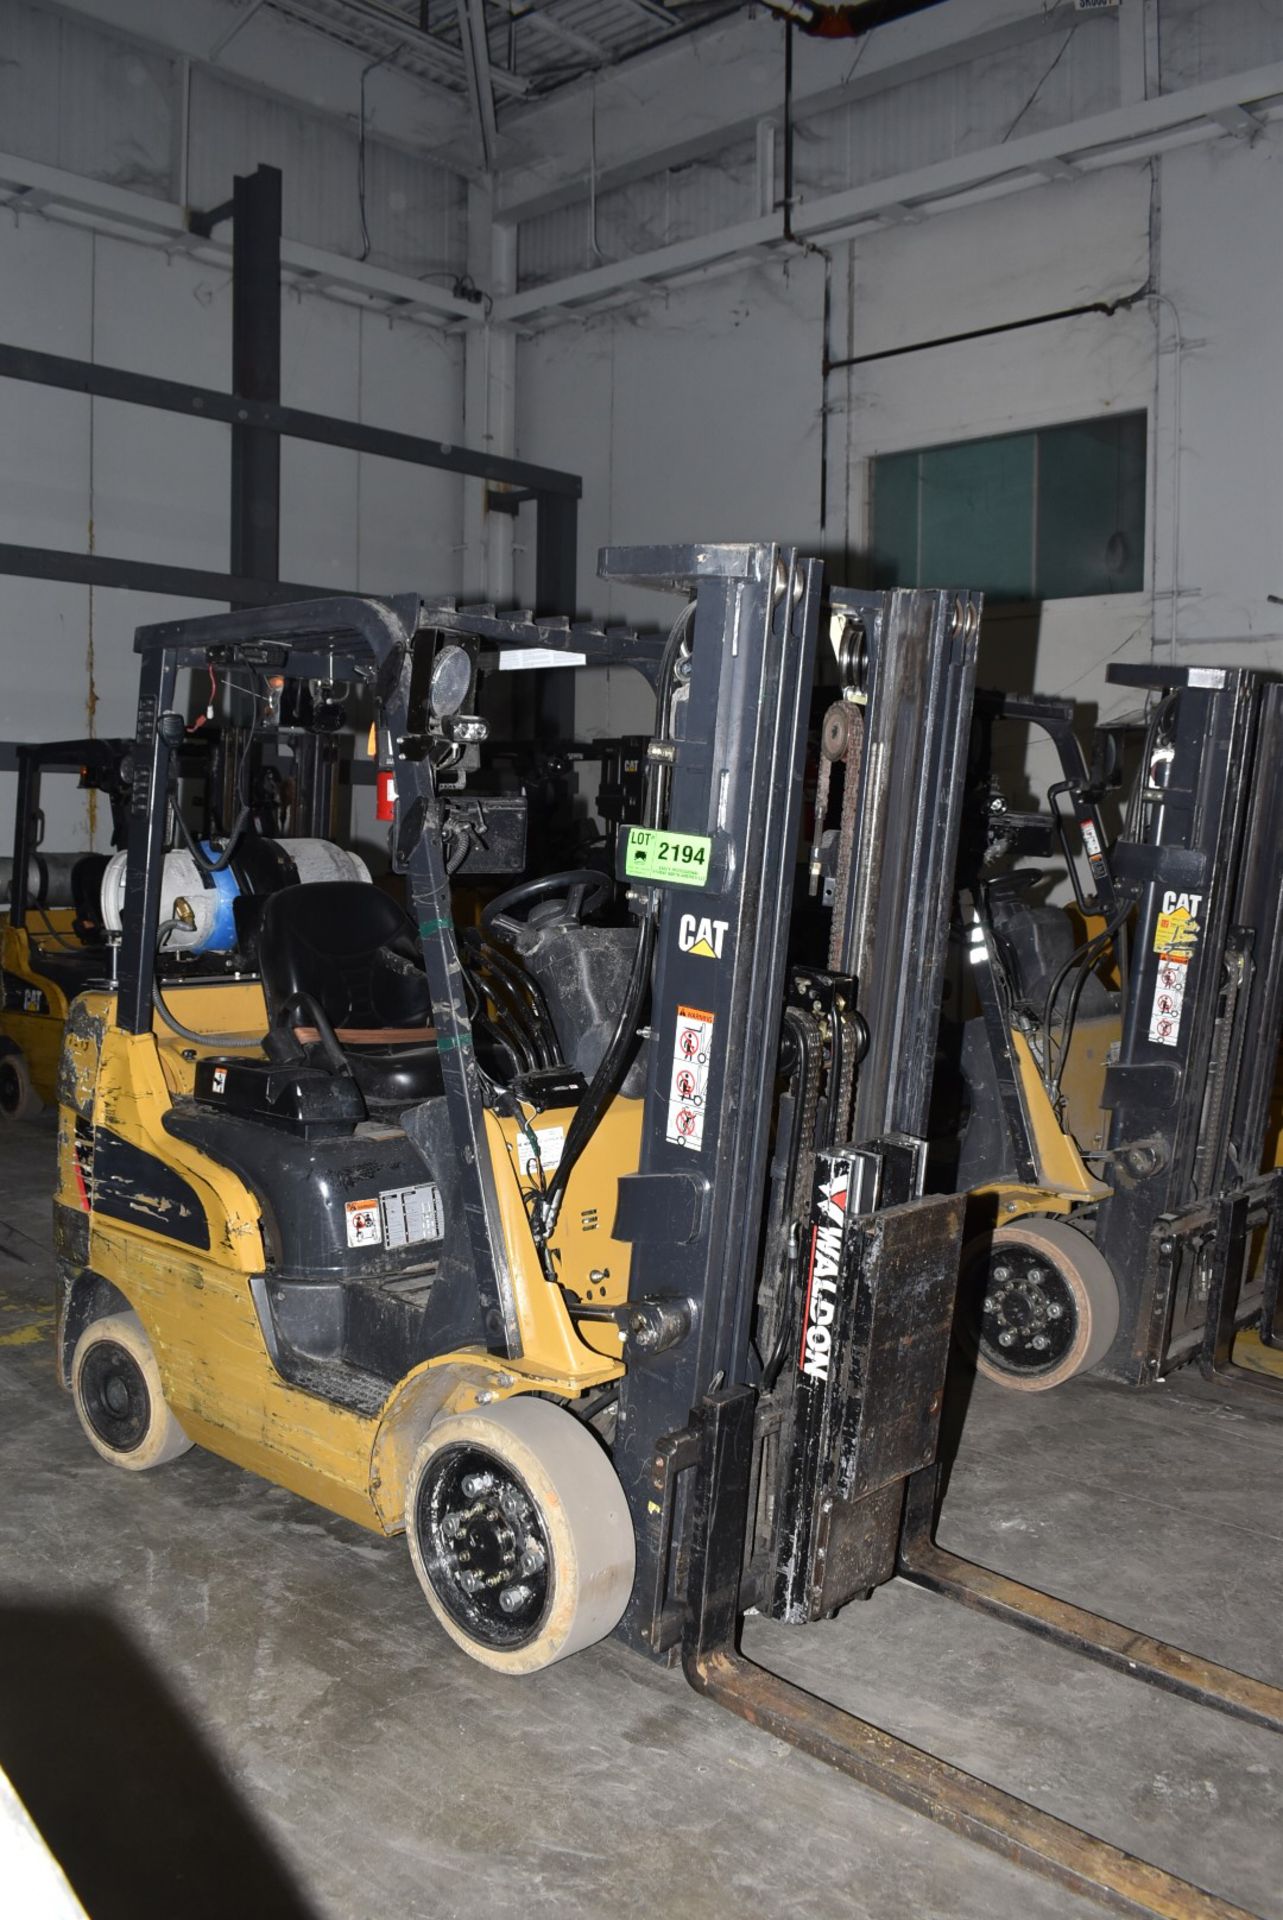 CATERPILLAR 2C5000 4,950 LBS. CAPACITY LPG FORKLIFT WITH 187" MAX VERTICAL REACH, 3-STAGE HIGH